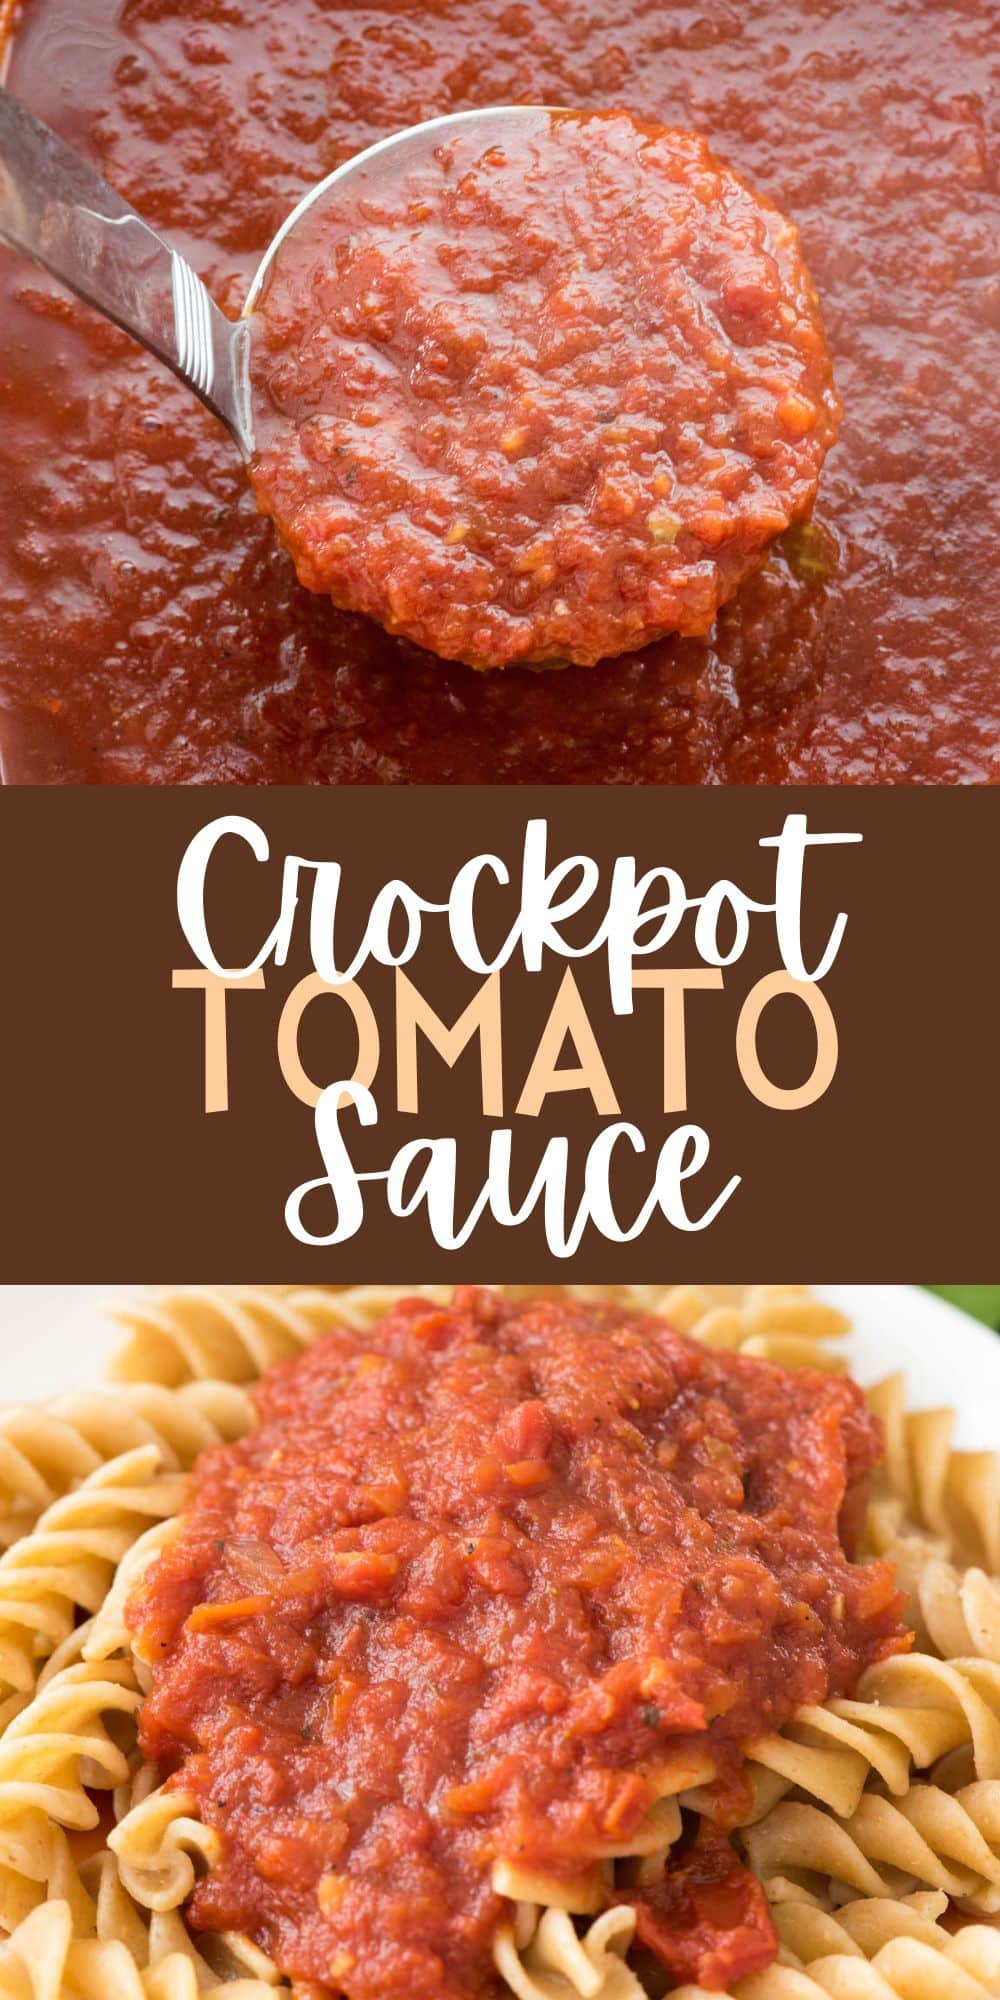 two photos of tomato sauce in the crockpot with a latel scooping some up with words on the image.